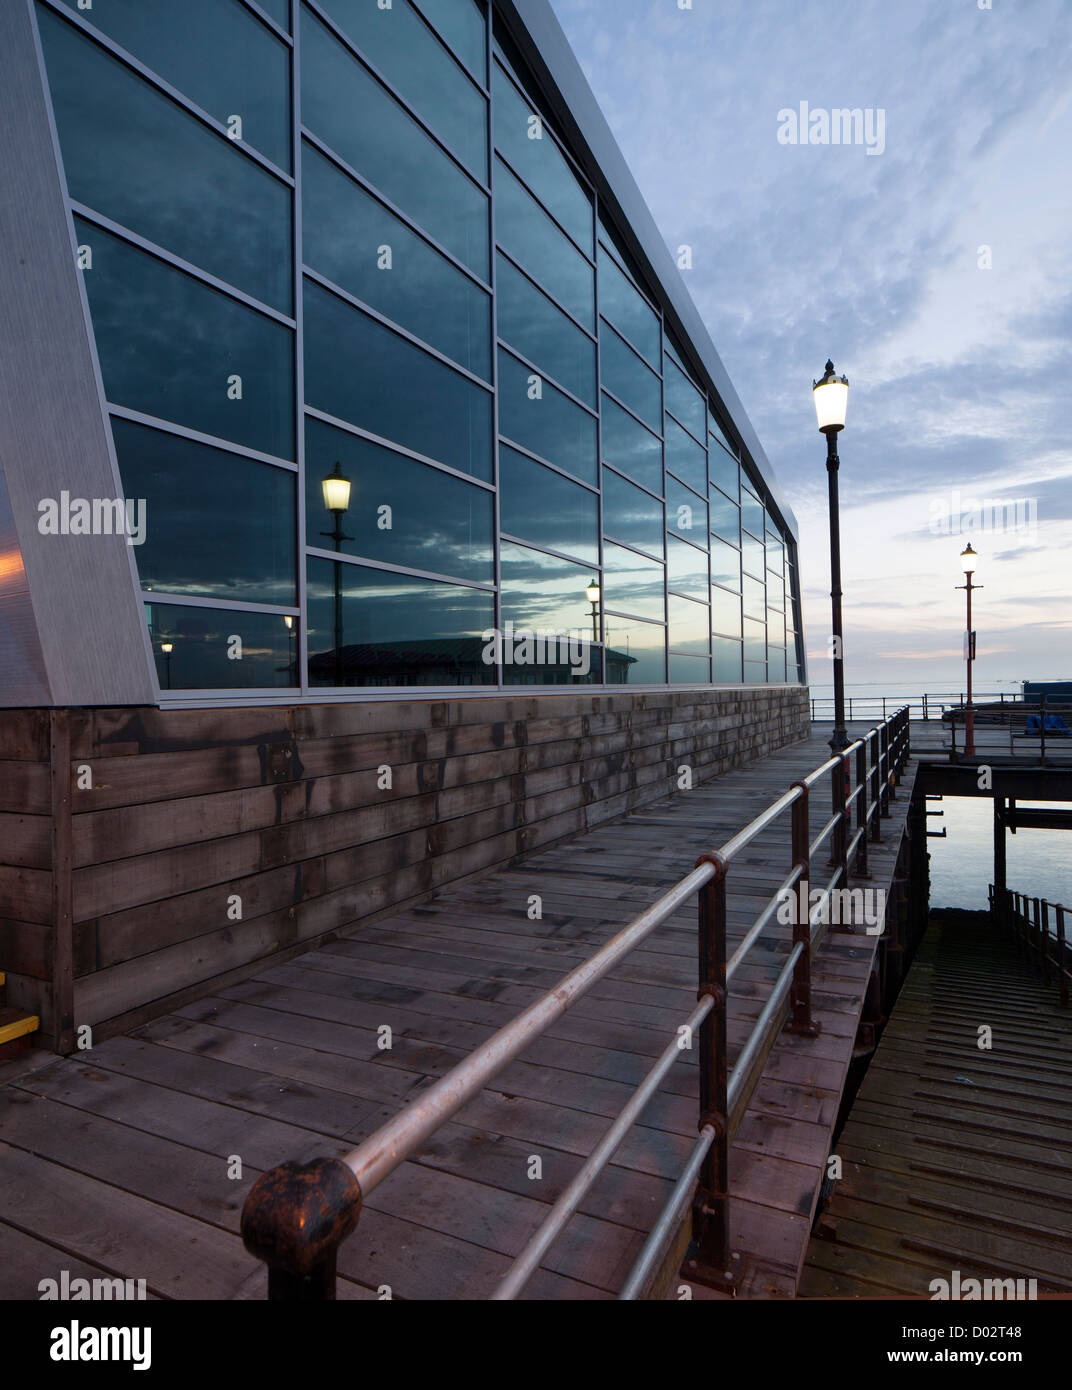 Southend Pier Cultural Centre, Southend, United Kingdom. Architect: White Architects, 2012. Twilight exterior looking towards th Stock Photo